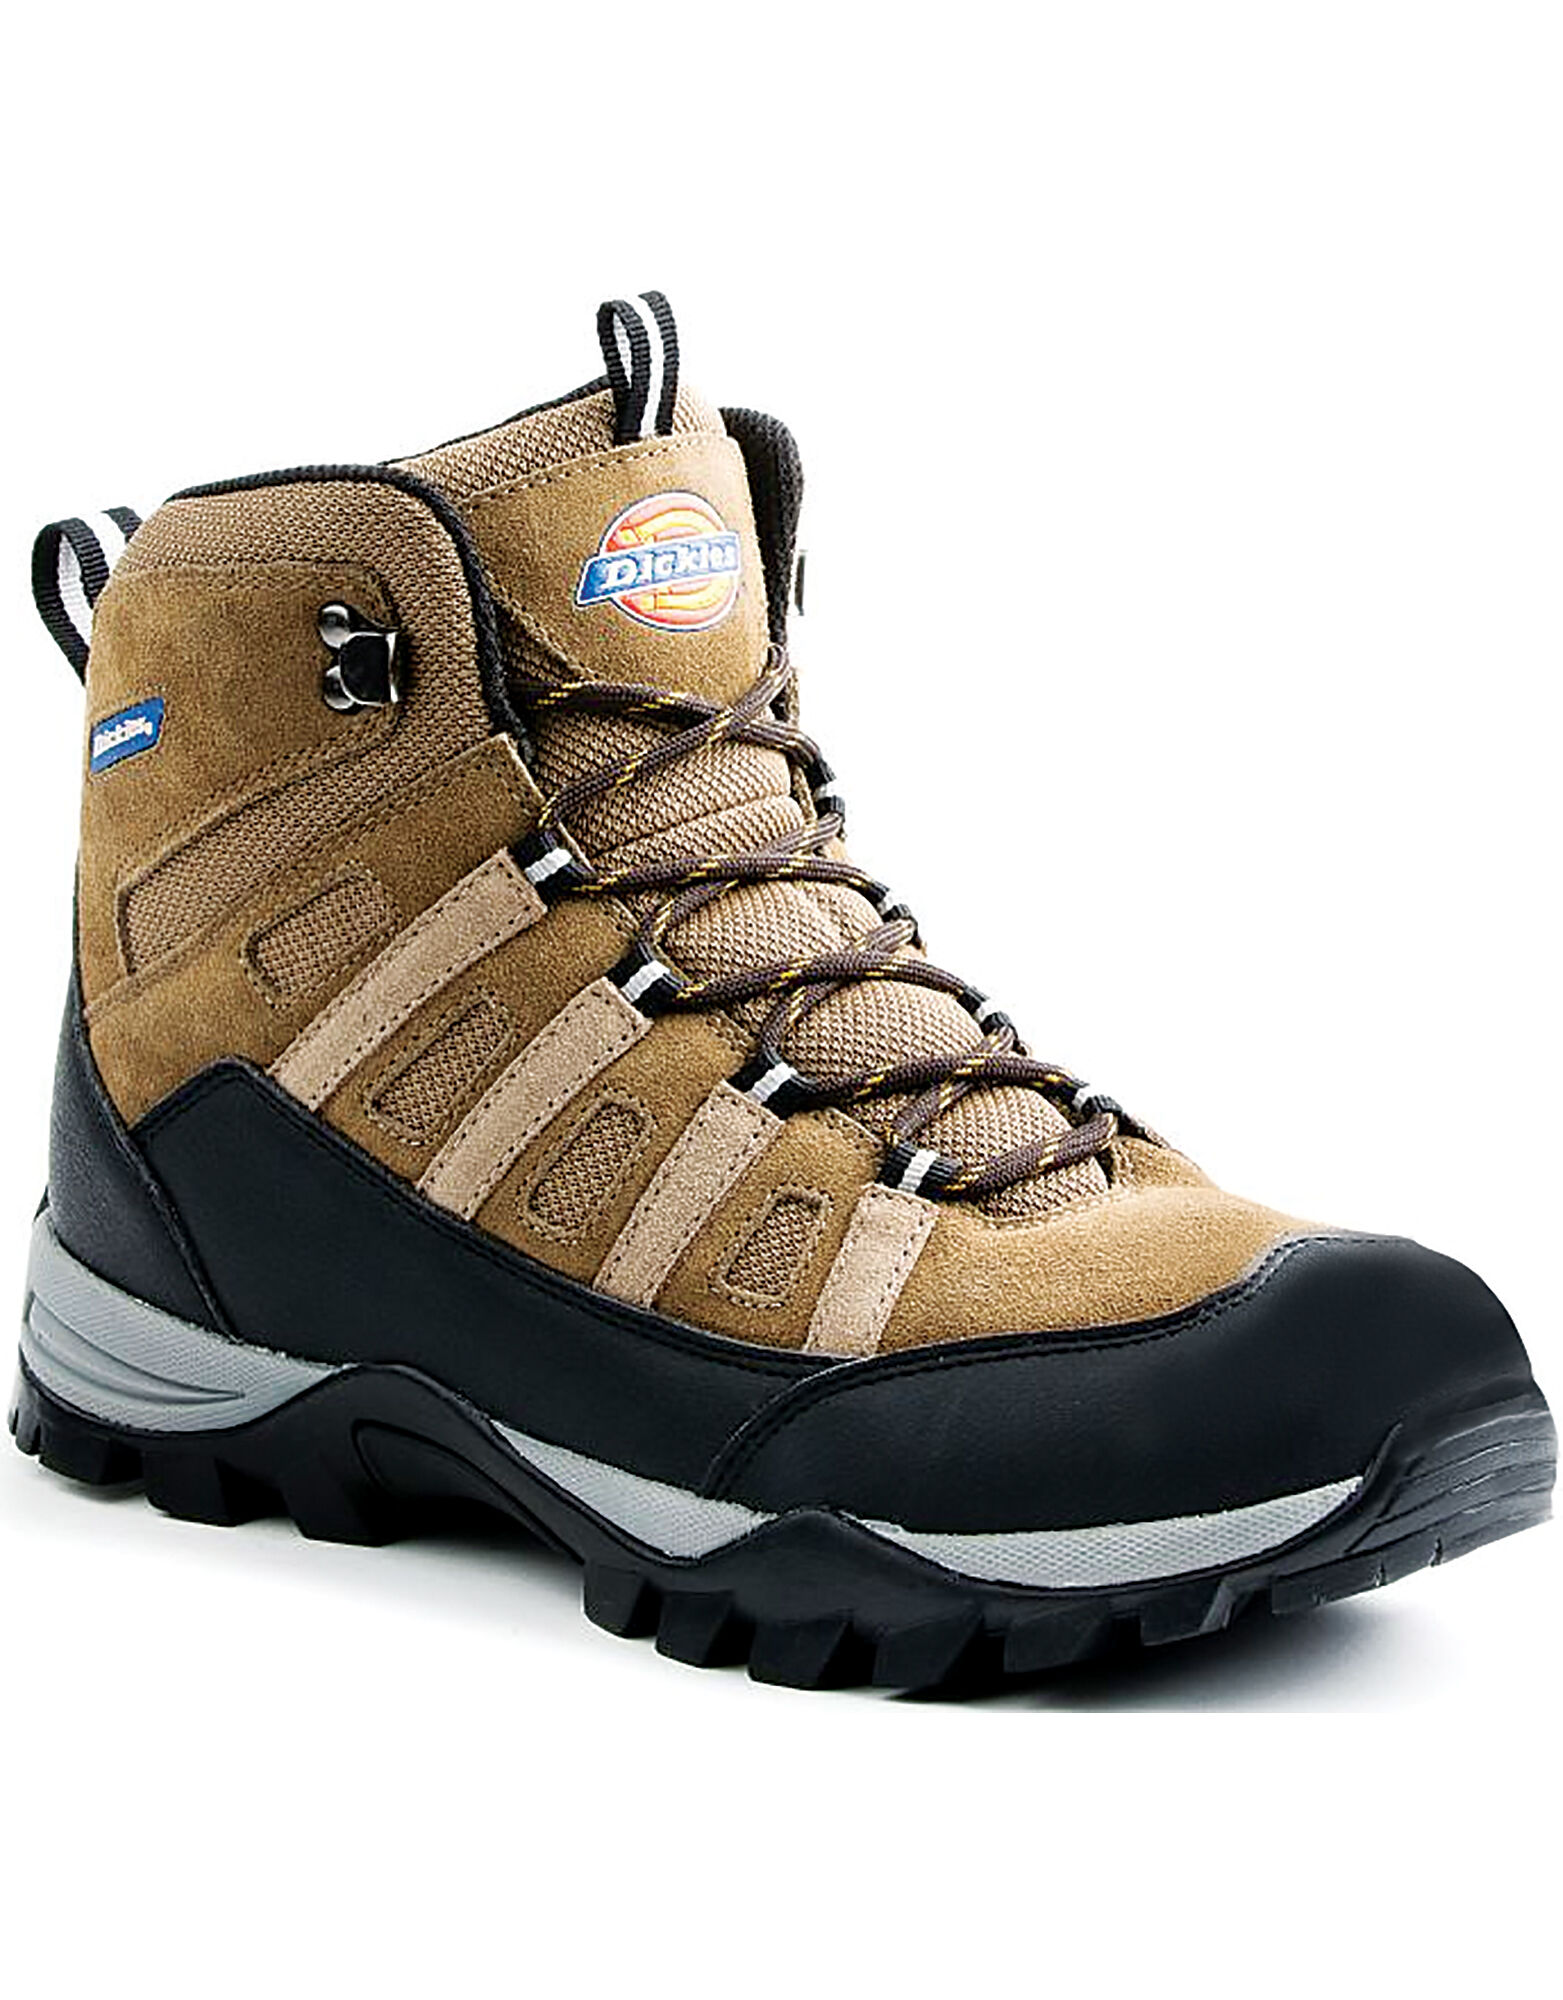 dickies everyday safety boot